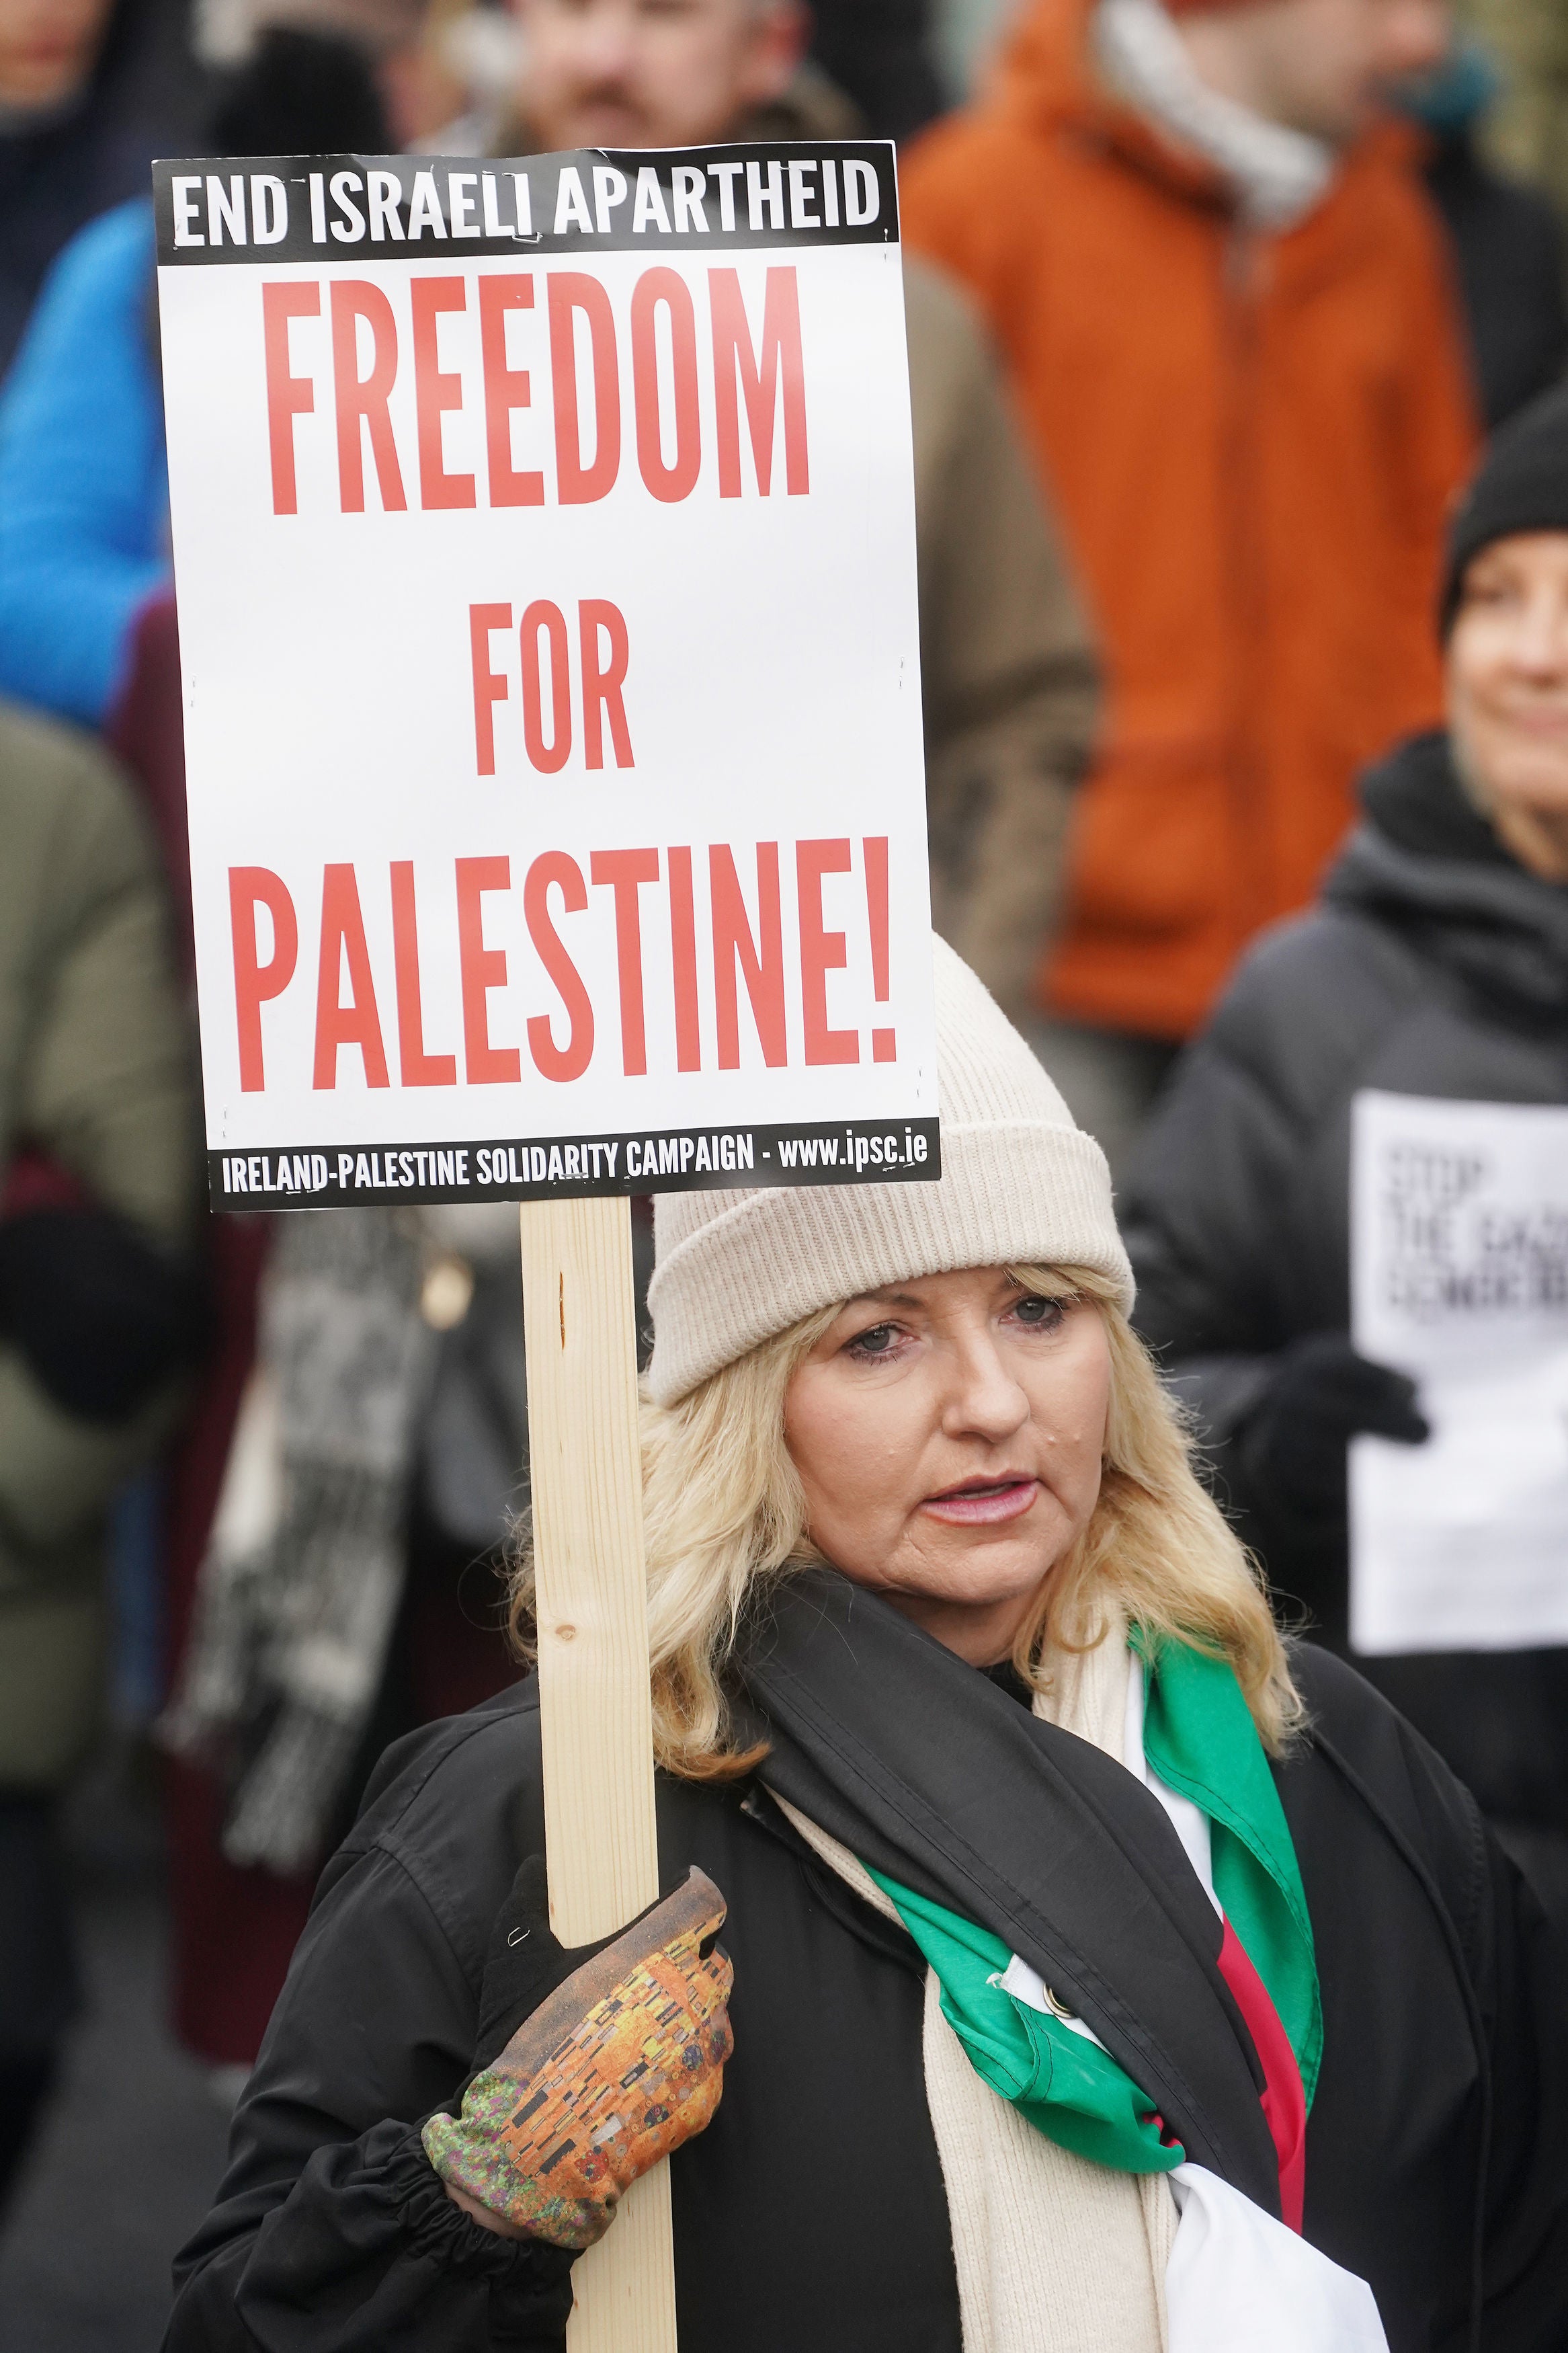 Protesters take part in a march organised by the Ireland-Palestine Solidarity Campaign on O’Connell Street, Dublin